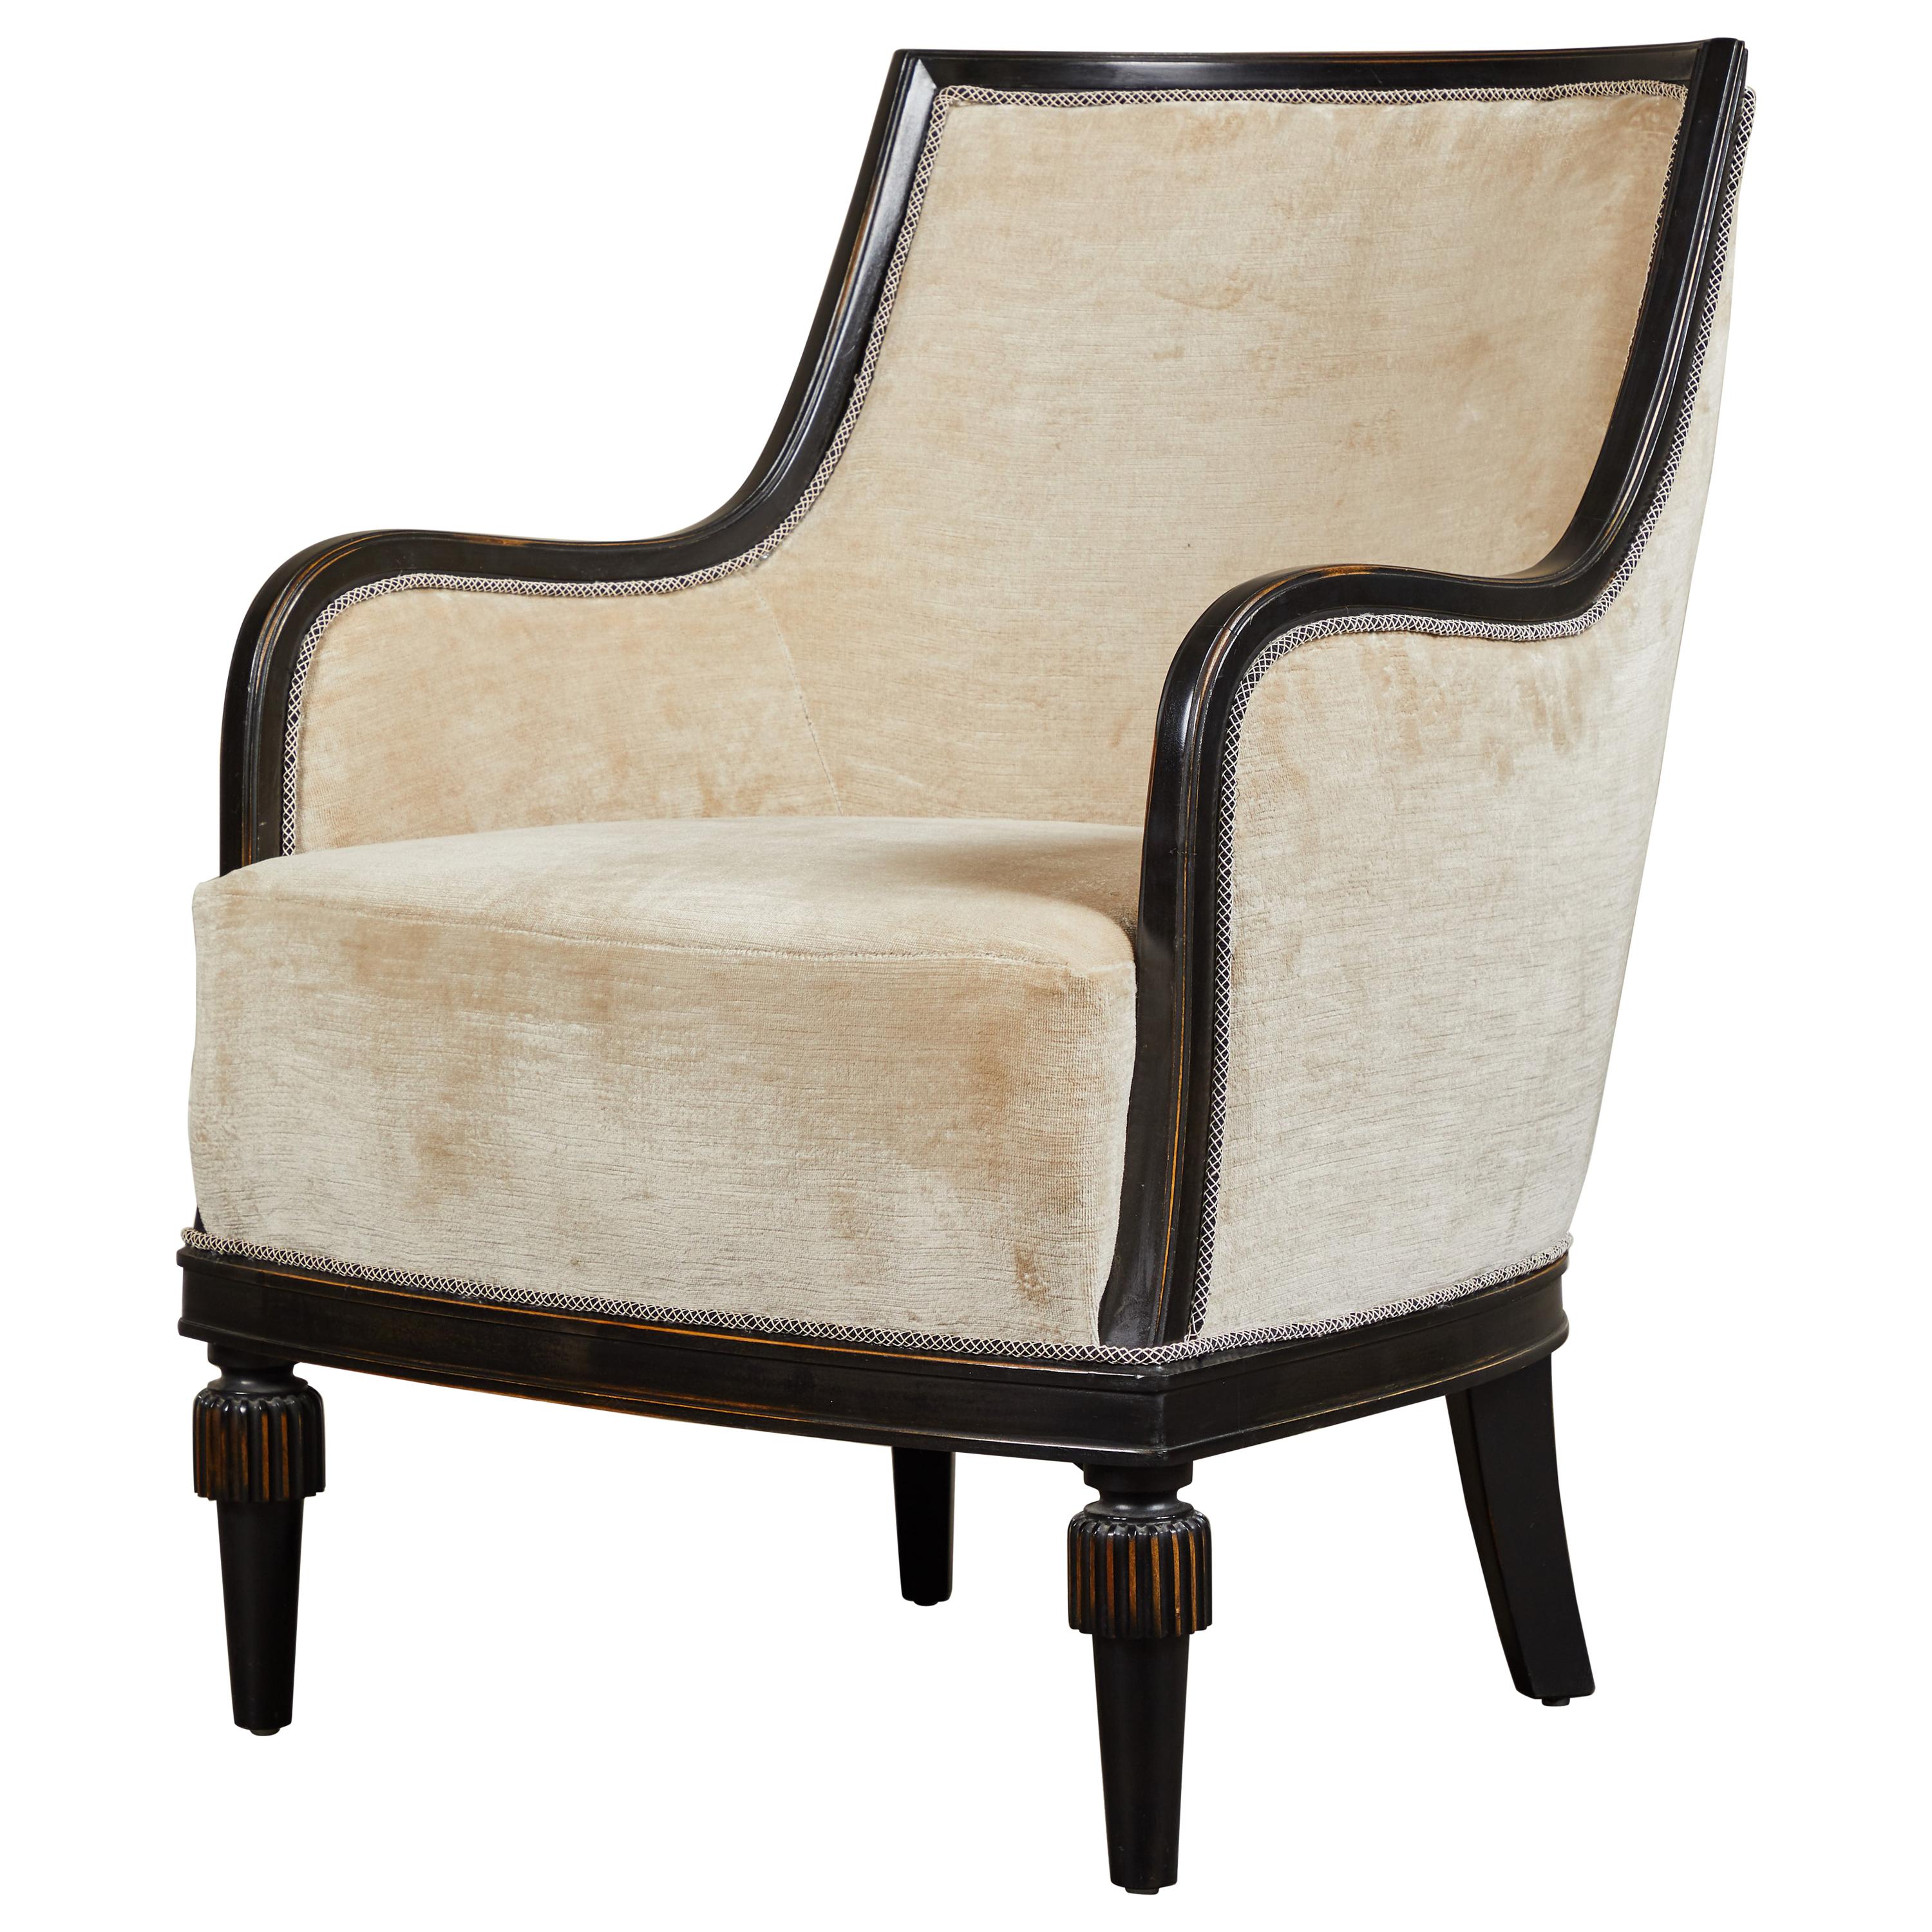 Victoria Chair with Tassel Foot, Susanne Hollis Collection For Sale